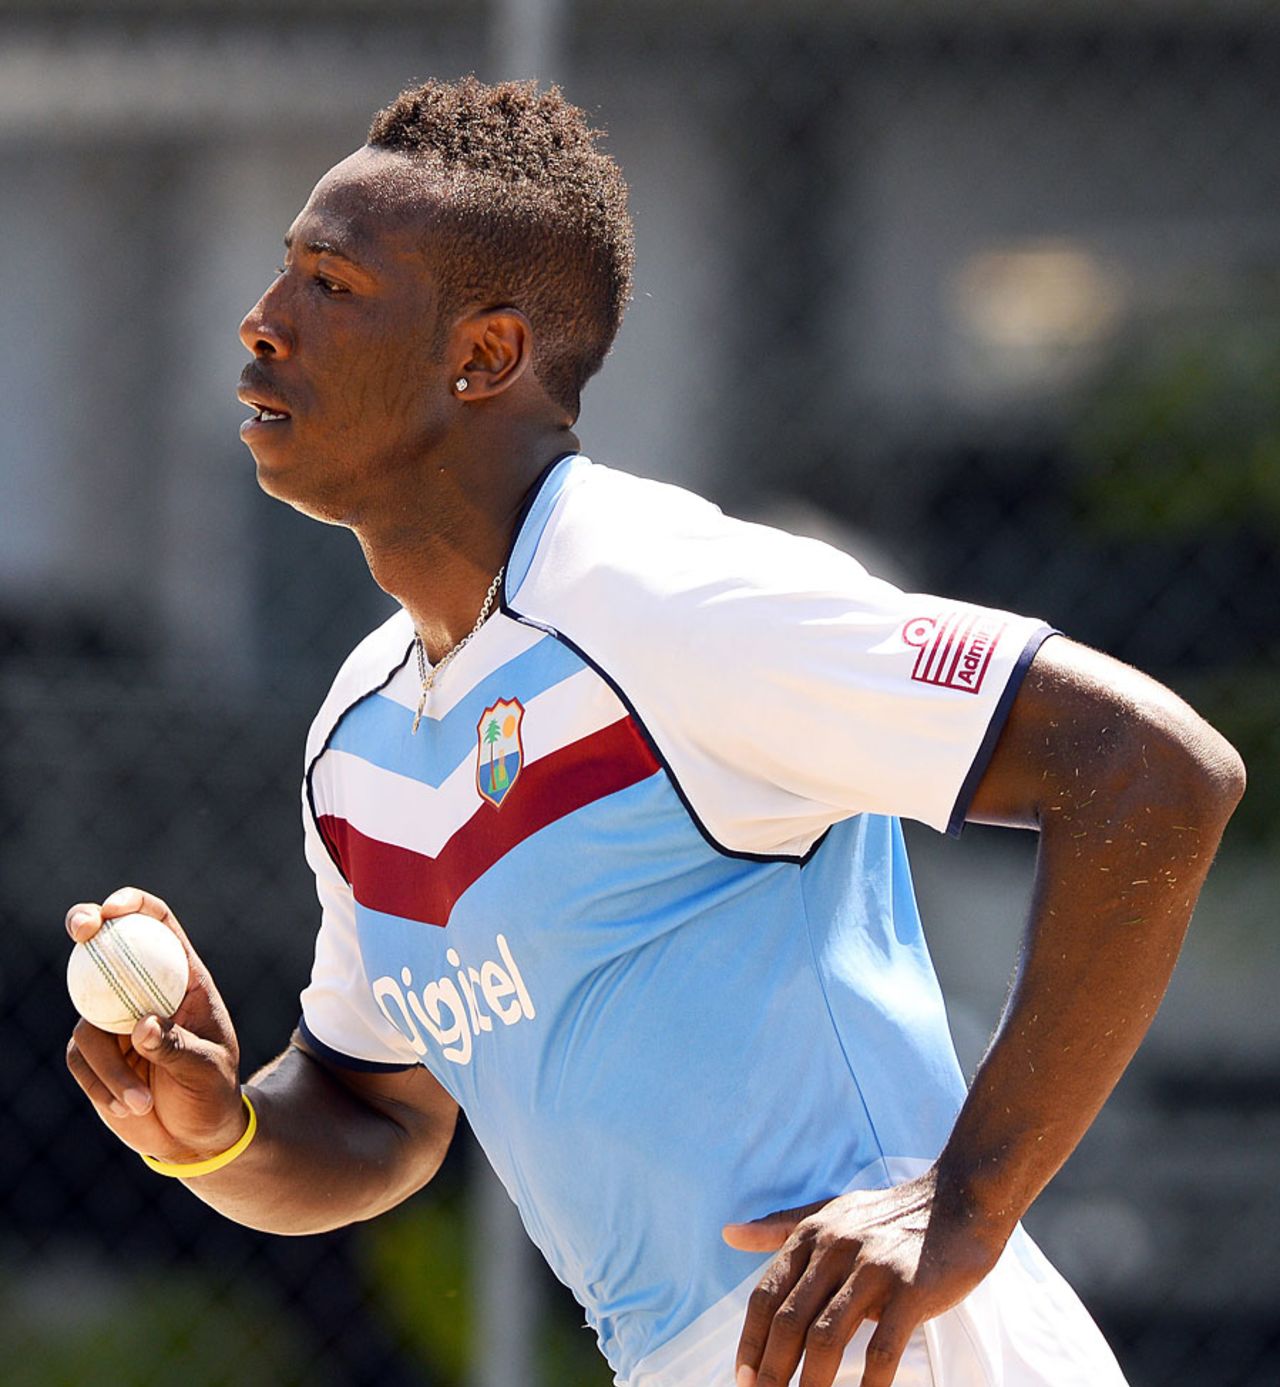 Andre Russell is part of West Indies' Twenty20 squad, Barbados, March 8, 2014